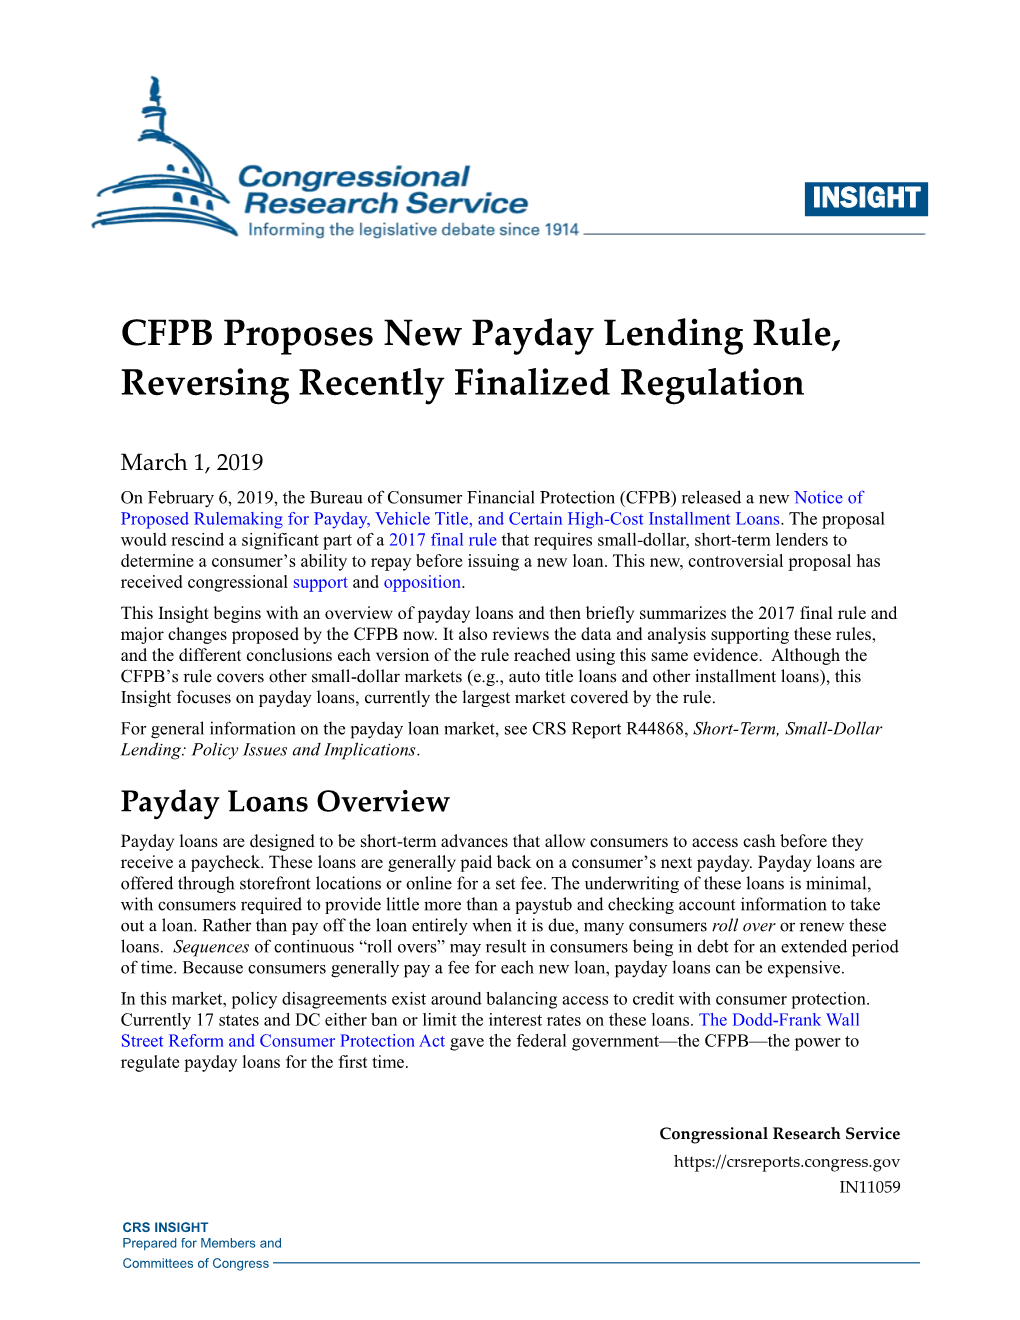 CFPB Proposes New Payday Lending Rule, Reversing Recently Finalized Regulation